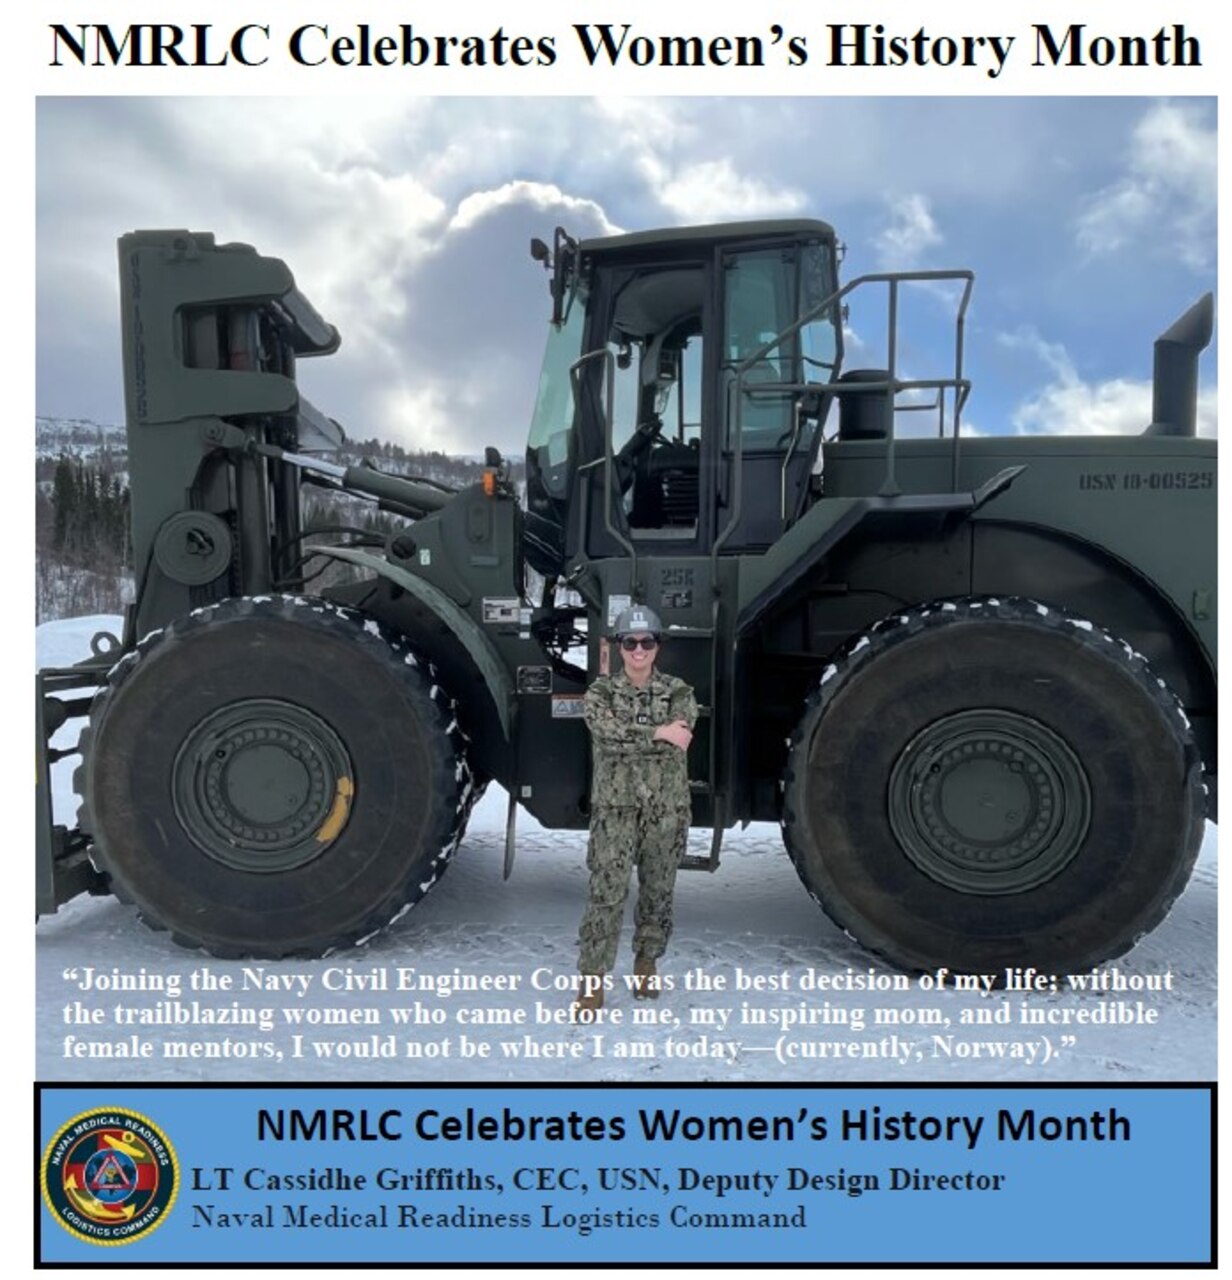 March is Women’s History Month and this year’s theme is, “Women Who Have Made Great Achievements." This is in recognition of the countless contributions women have made in creating a positive and brighter future. Women’s contributions are acknowledged throughout March, a time when we celebrate the struggles and accomplishments of women throughout U.S. history. NMRLC's Deputy Design Director, LT Cassidhe Griffiths, shares her thoughts on the importance of Women's History Month.